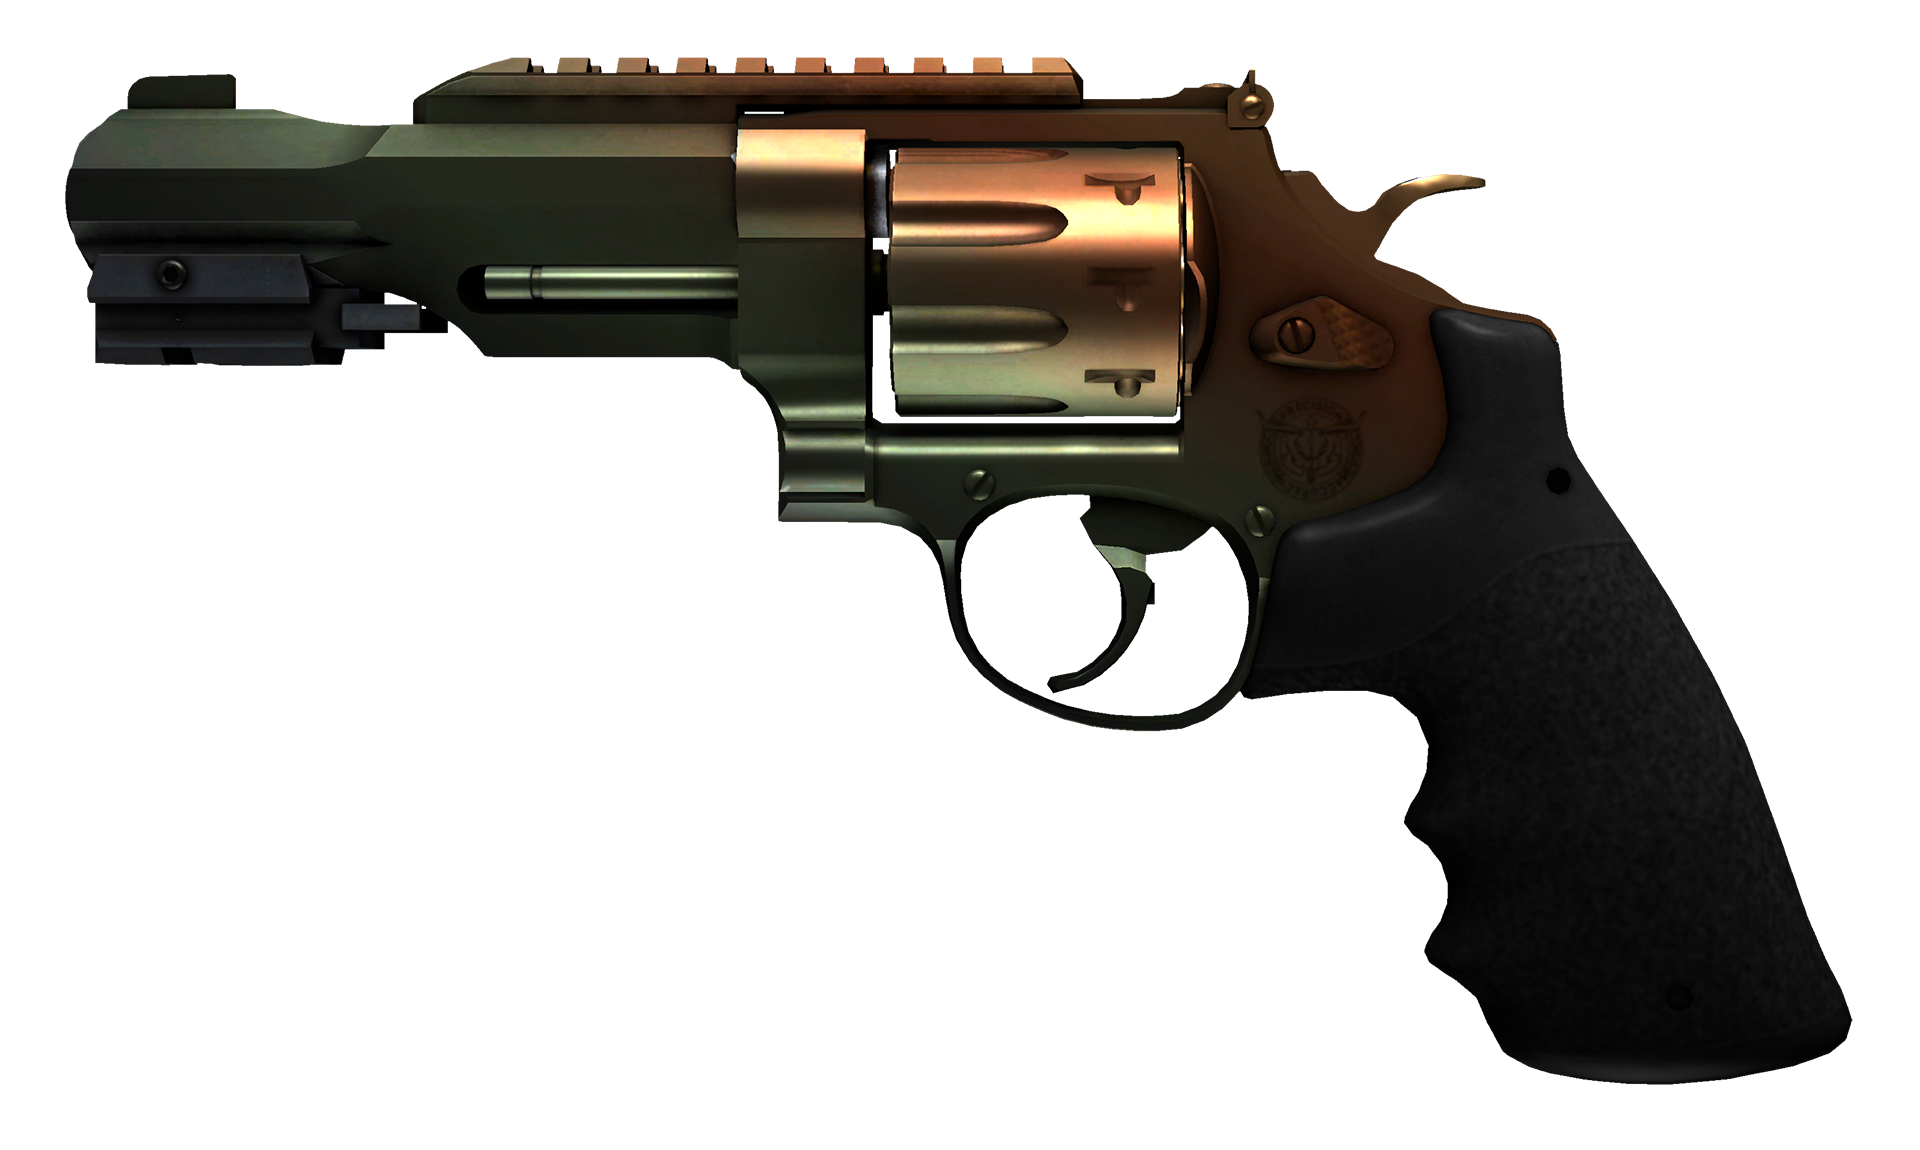 R8 Revolver Canal Spray cs go skin download the last version for ios